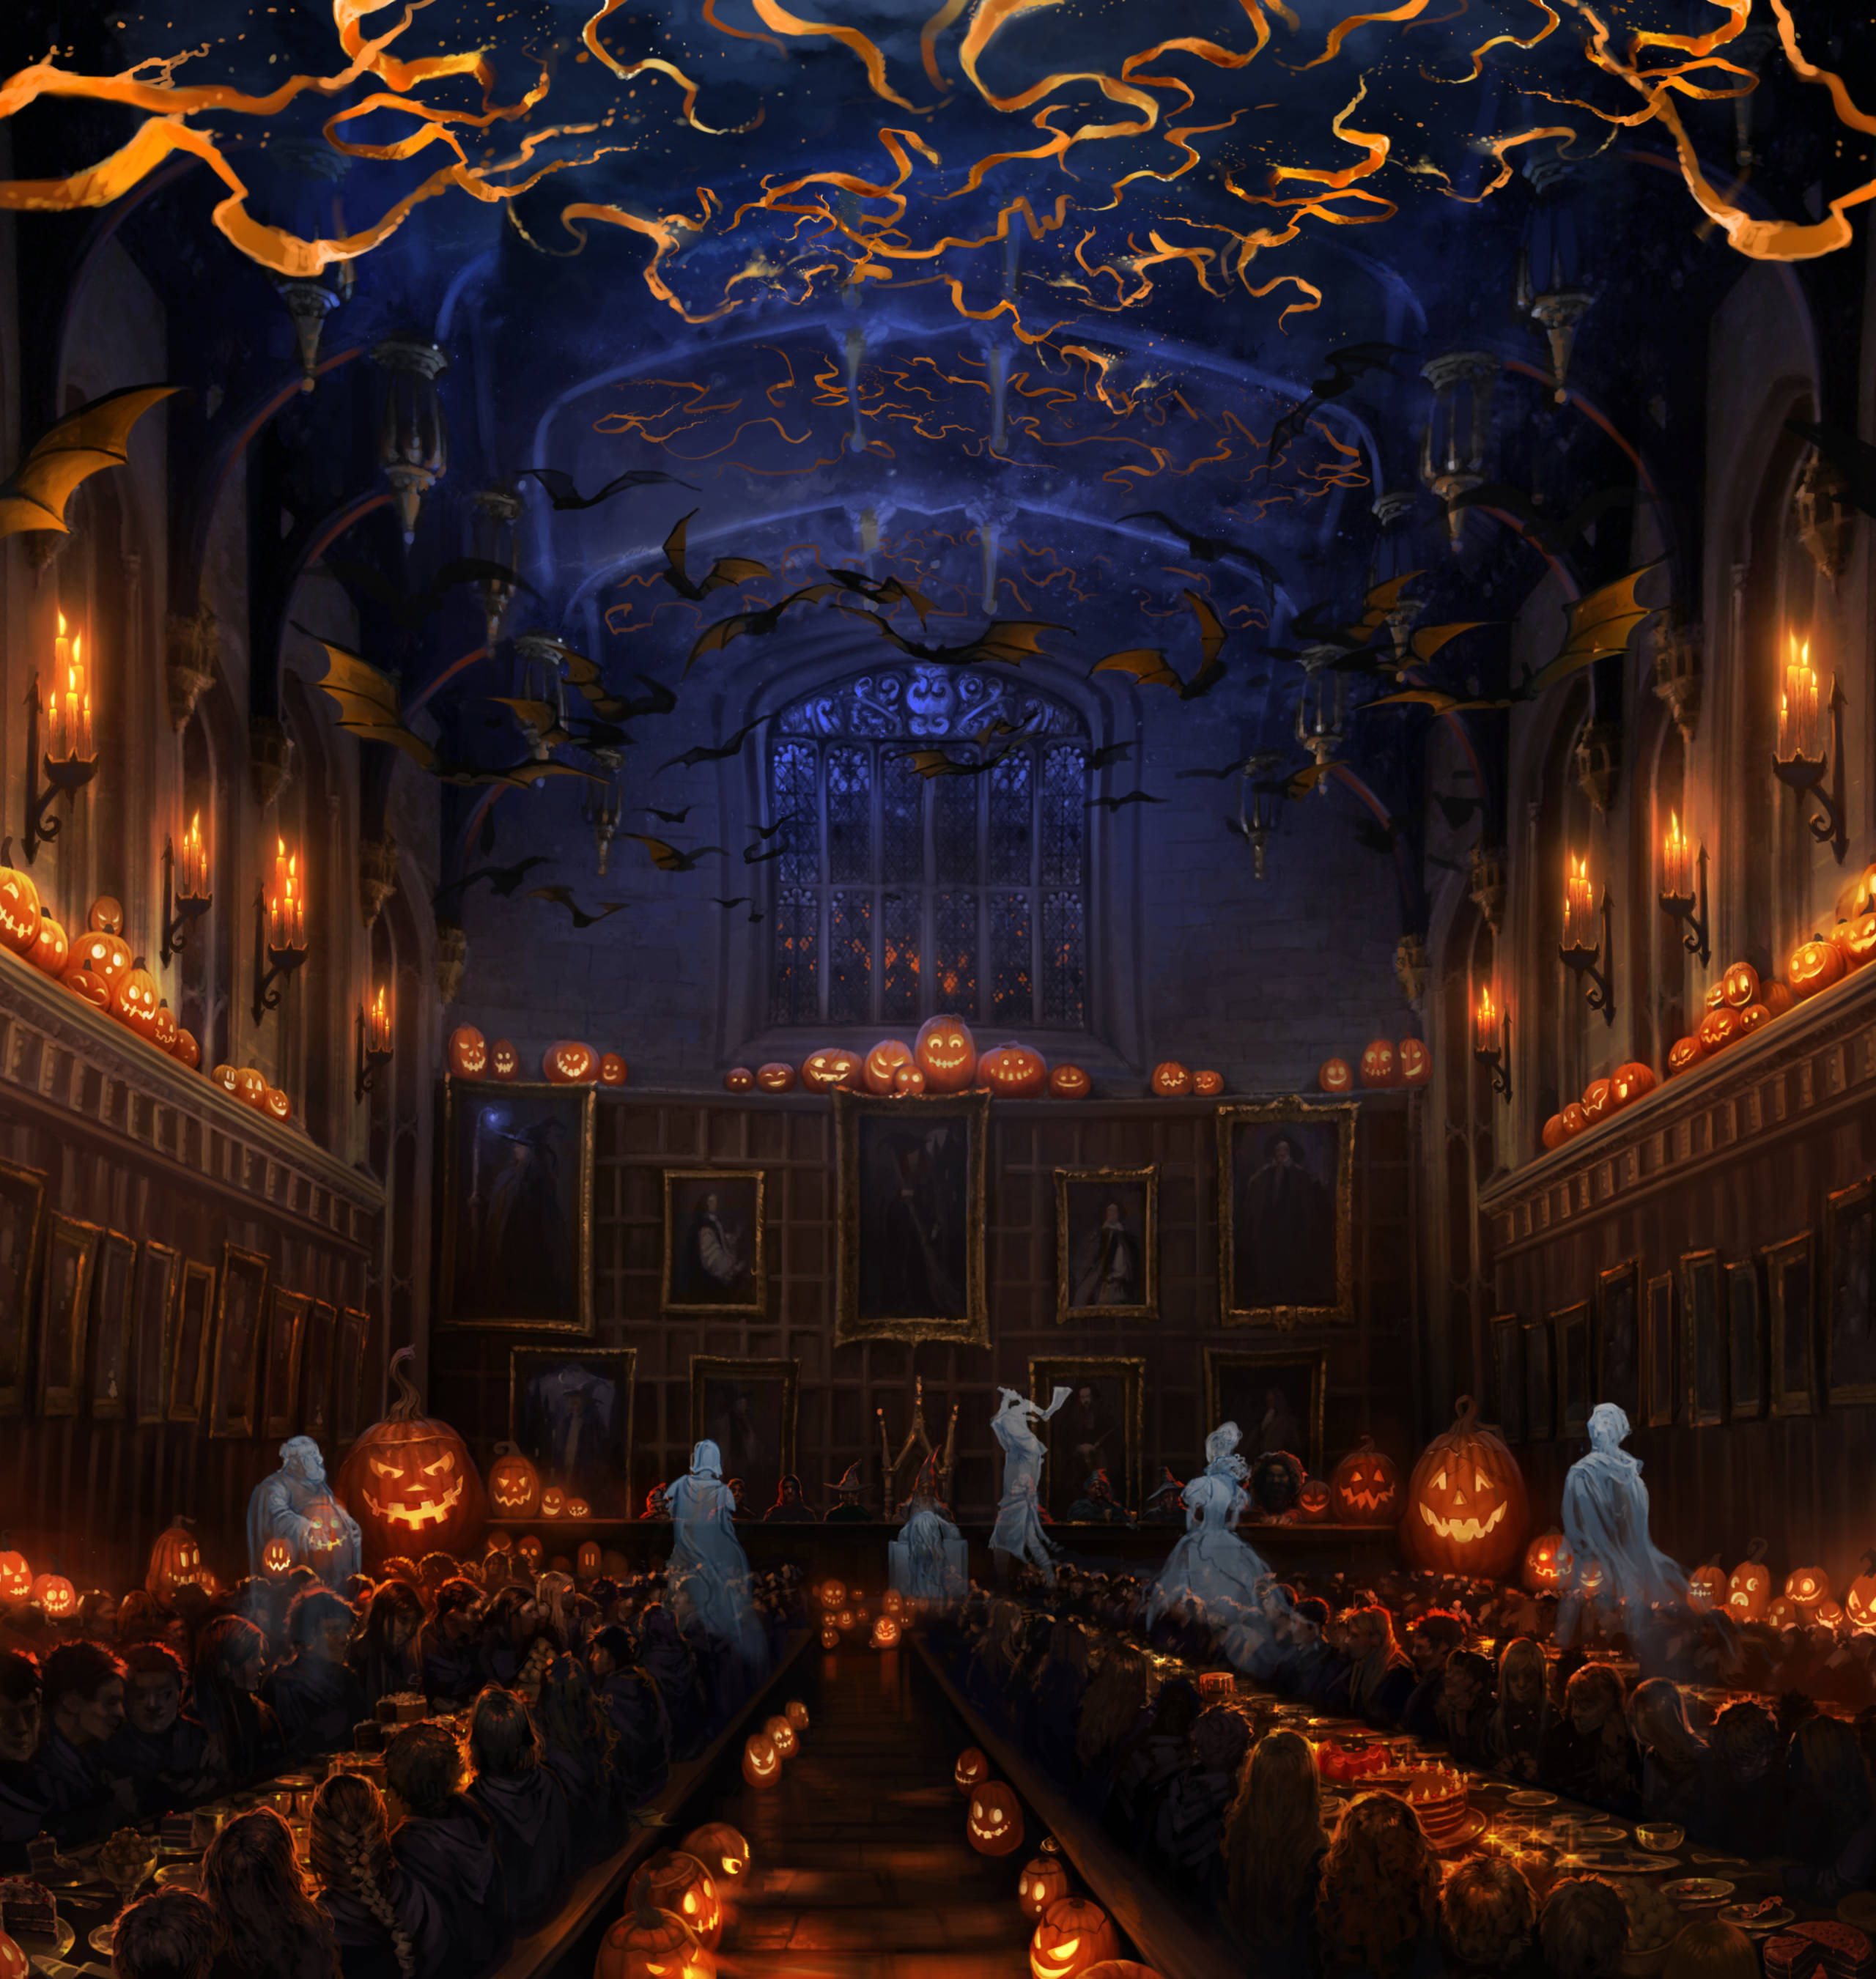 The Great Hall at Halloween with the ghosts